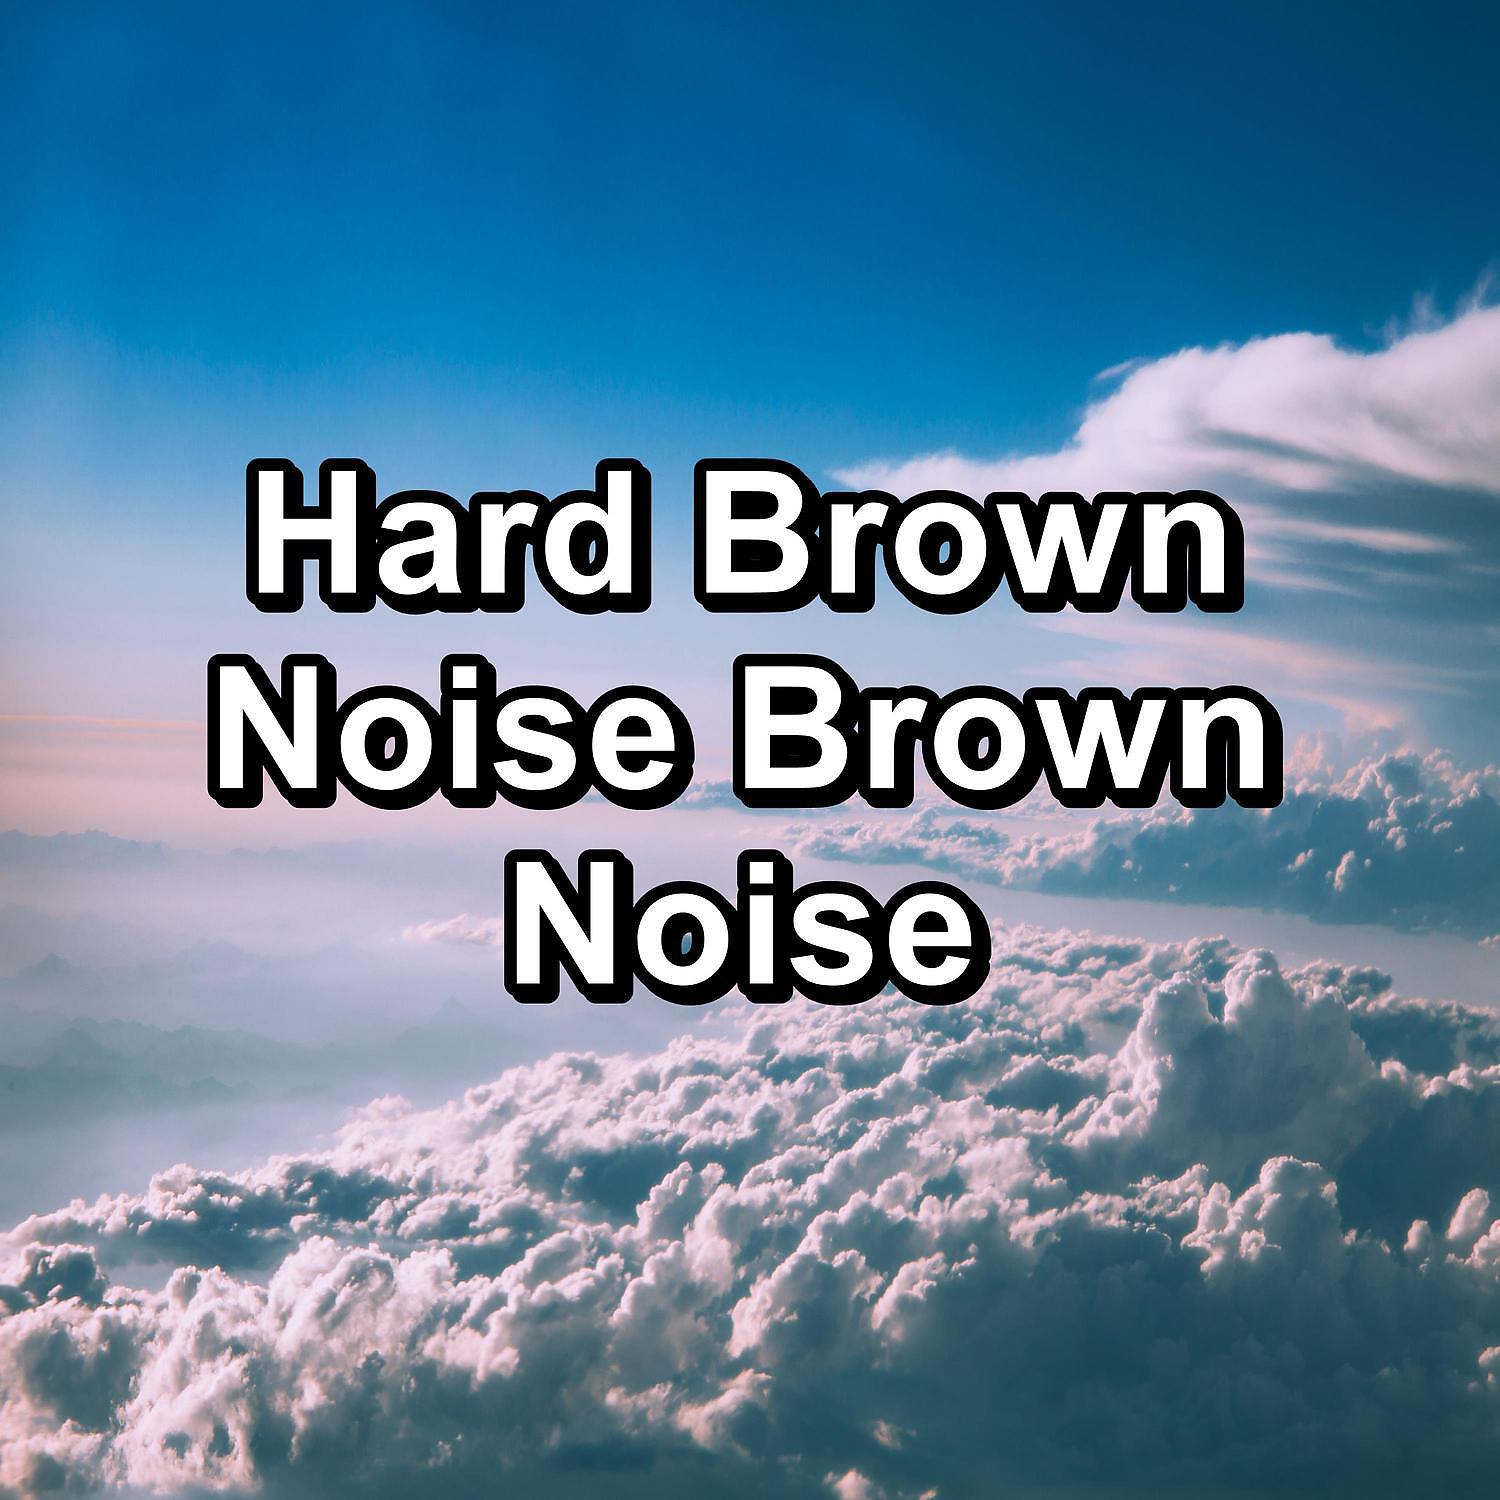 Pink Noise Sound, White Noise Sound, Brown Noise Sound - Fan Sounds For Stress Relief Loopable for 24 Hours